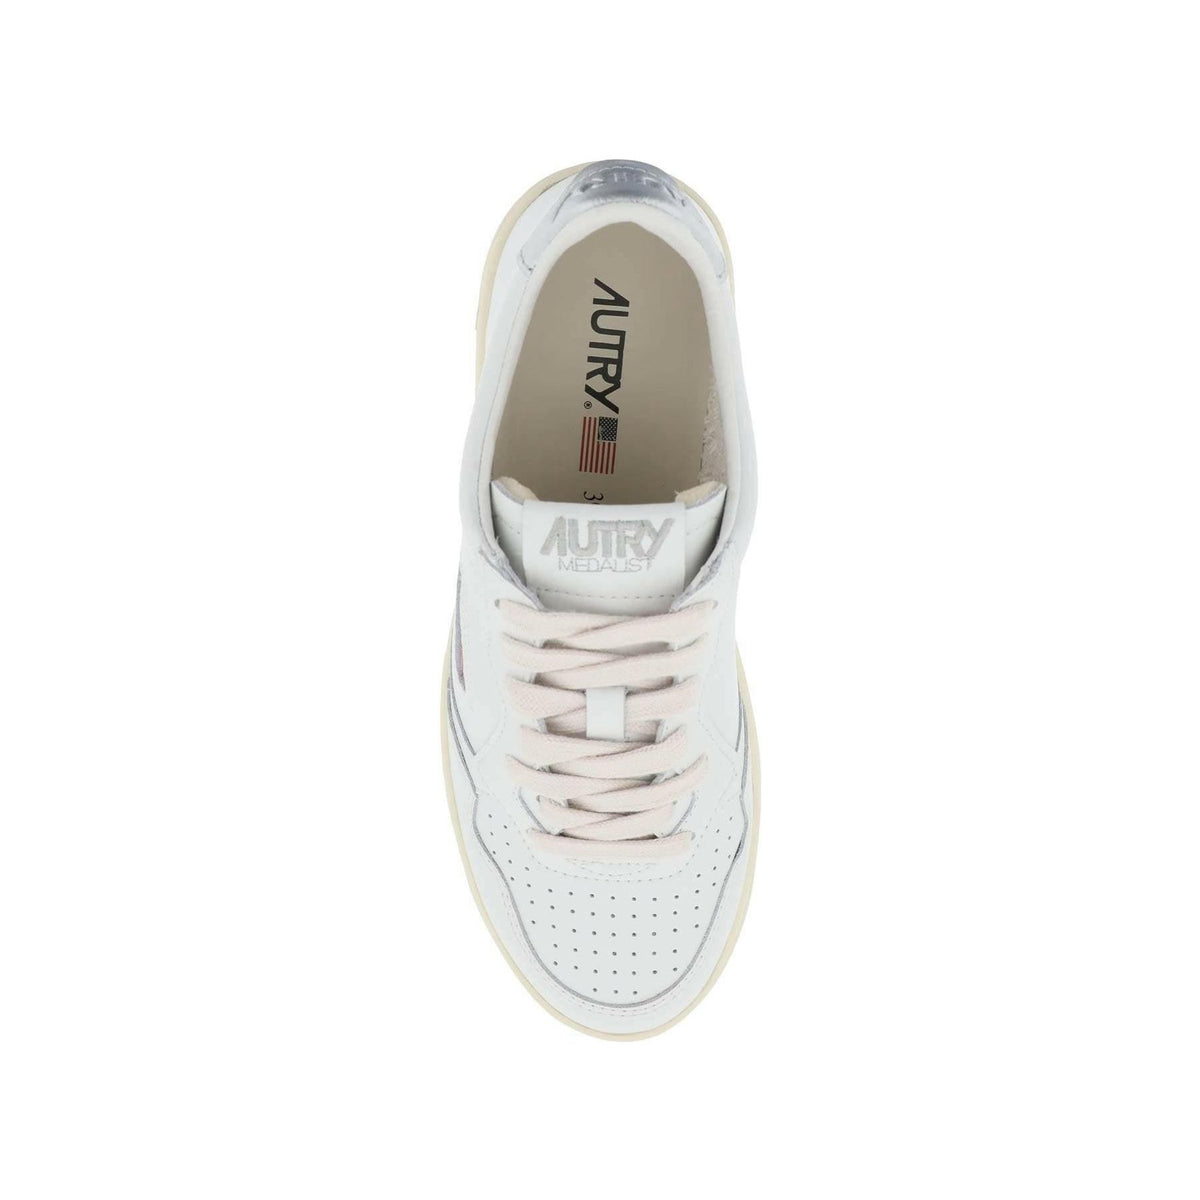 AUTRY - White and Silver Leather Medalist Low Sneakers - JOHN JULIA